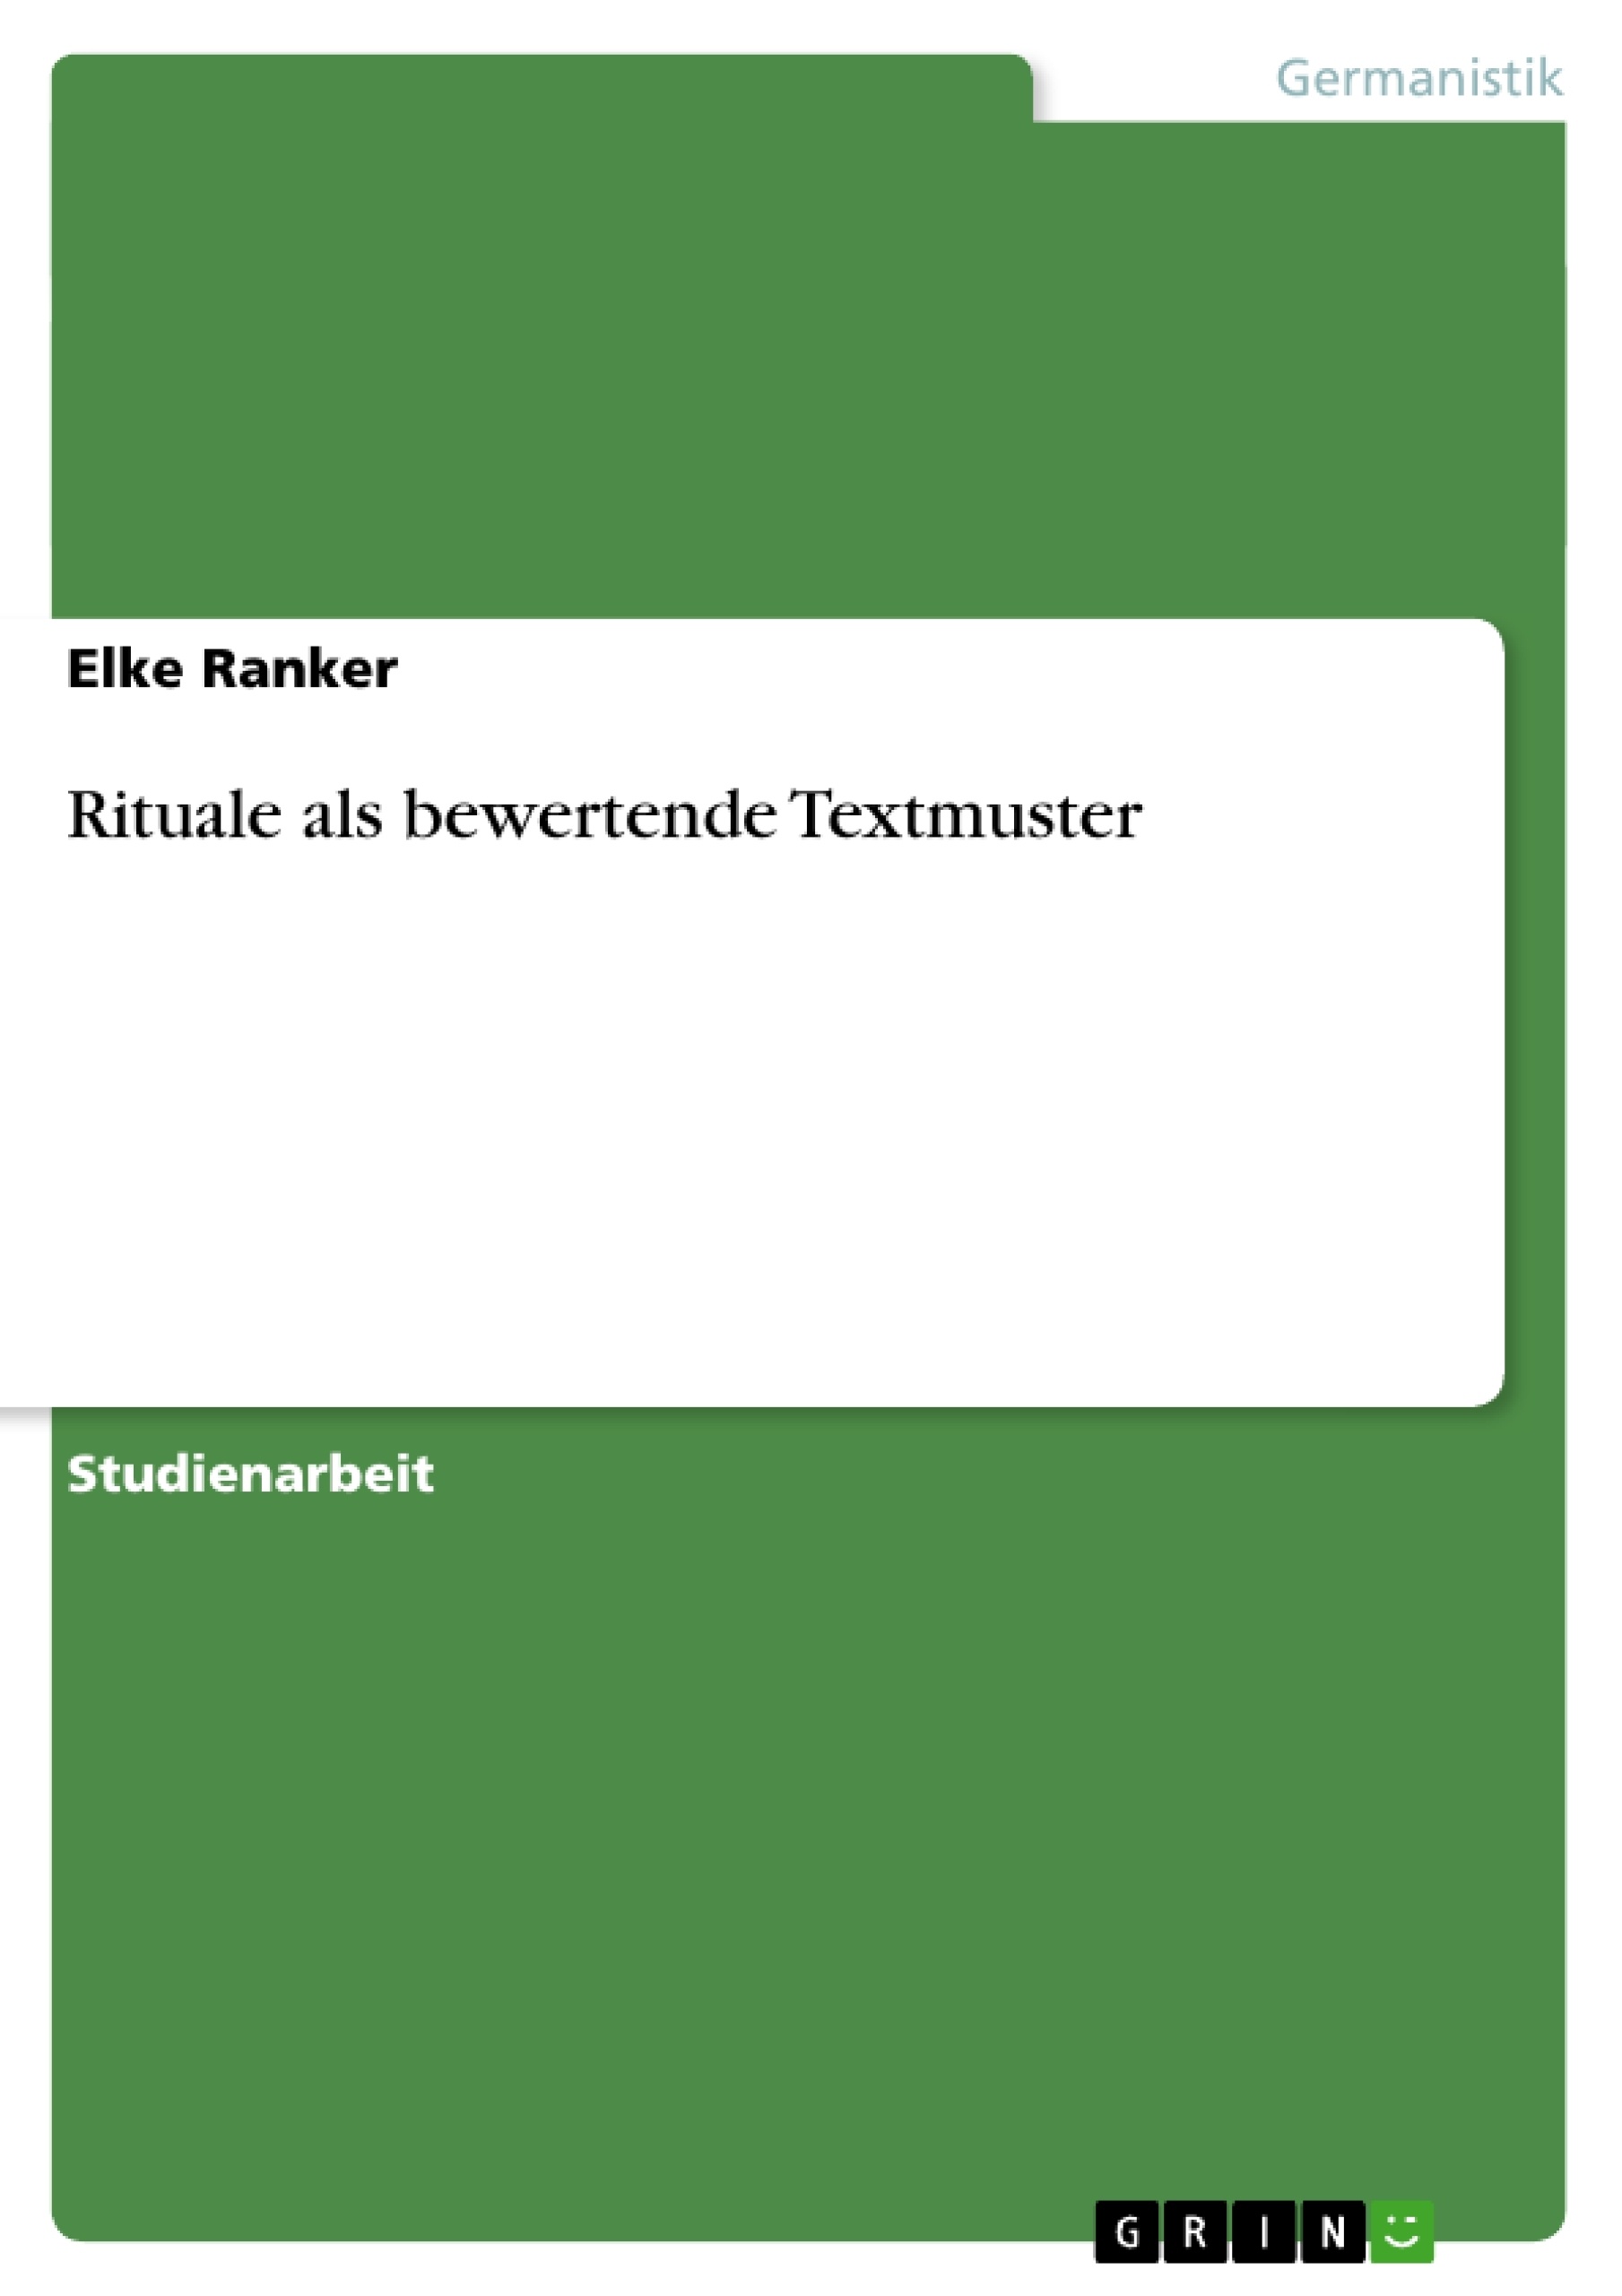 Título: Rituale als bewertende Textmuster